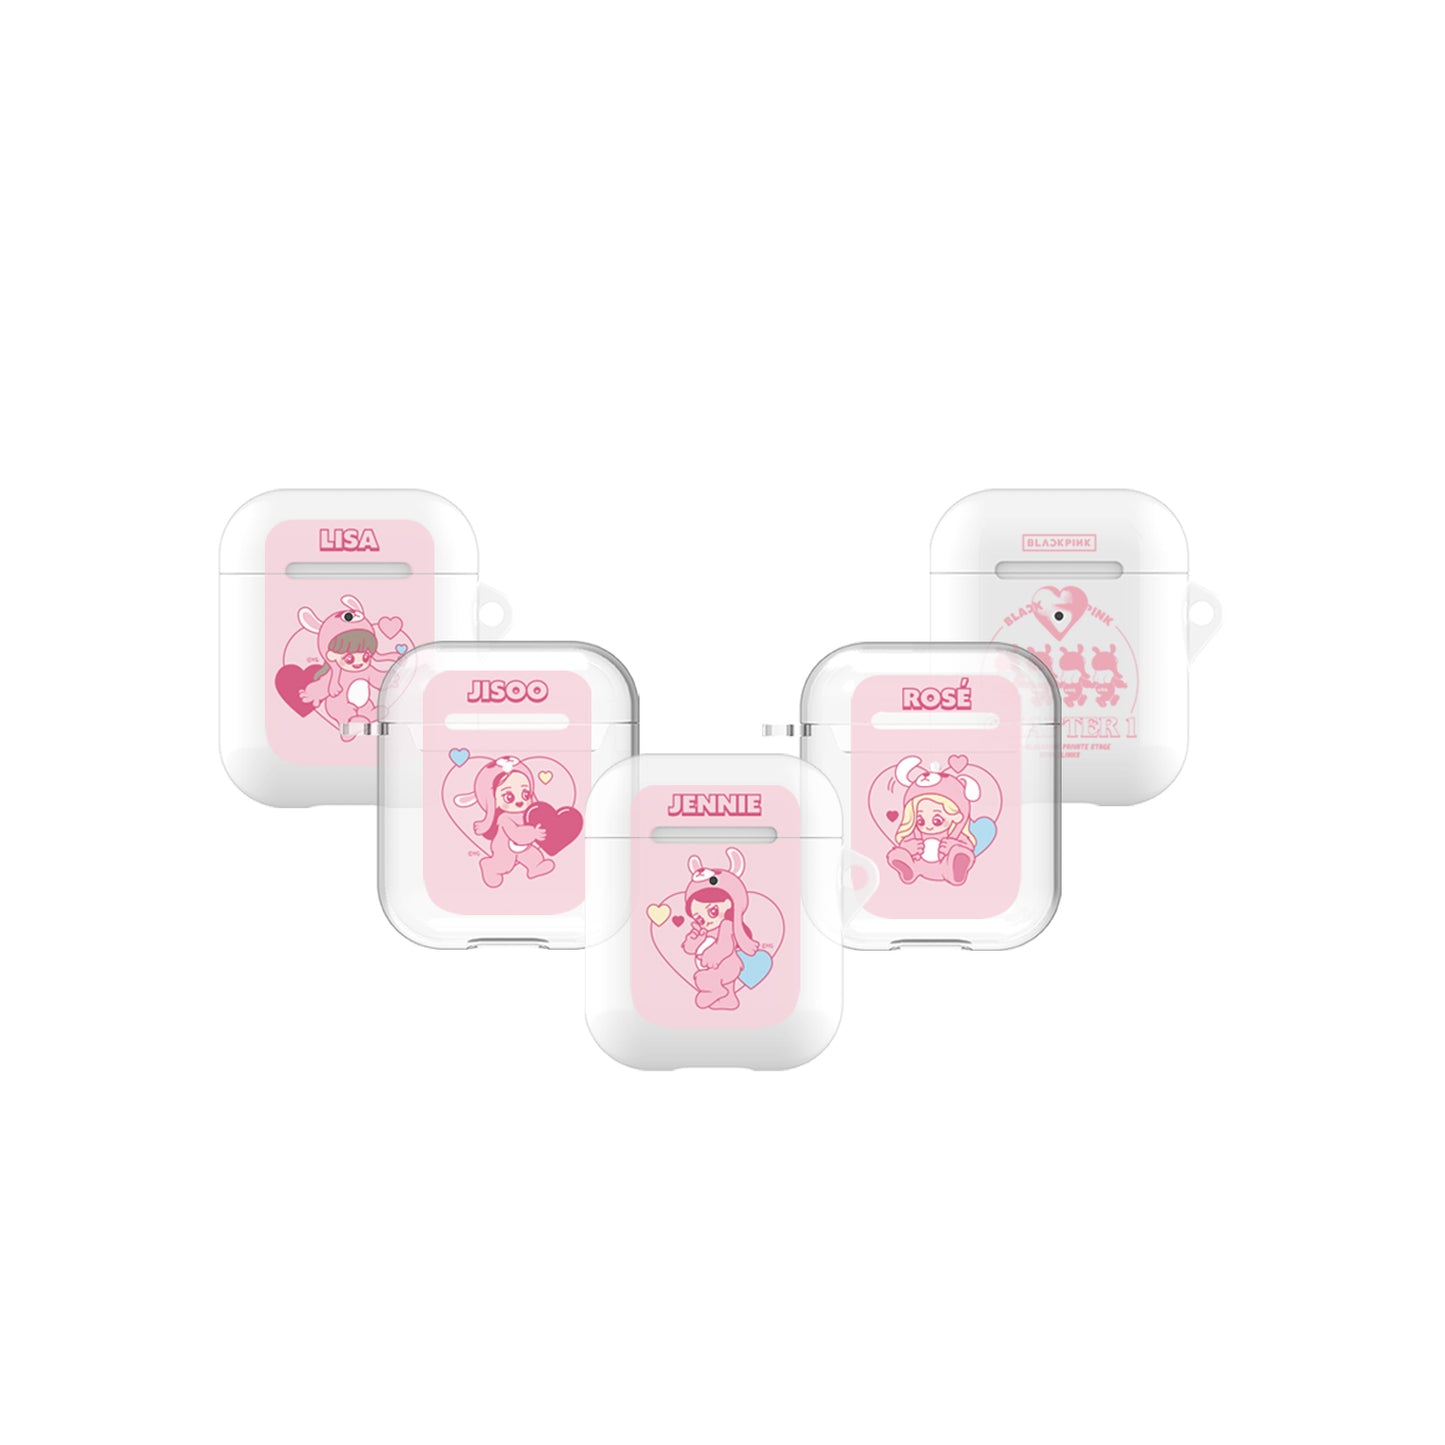 [BLACKPINK] Character Airpods Case